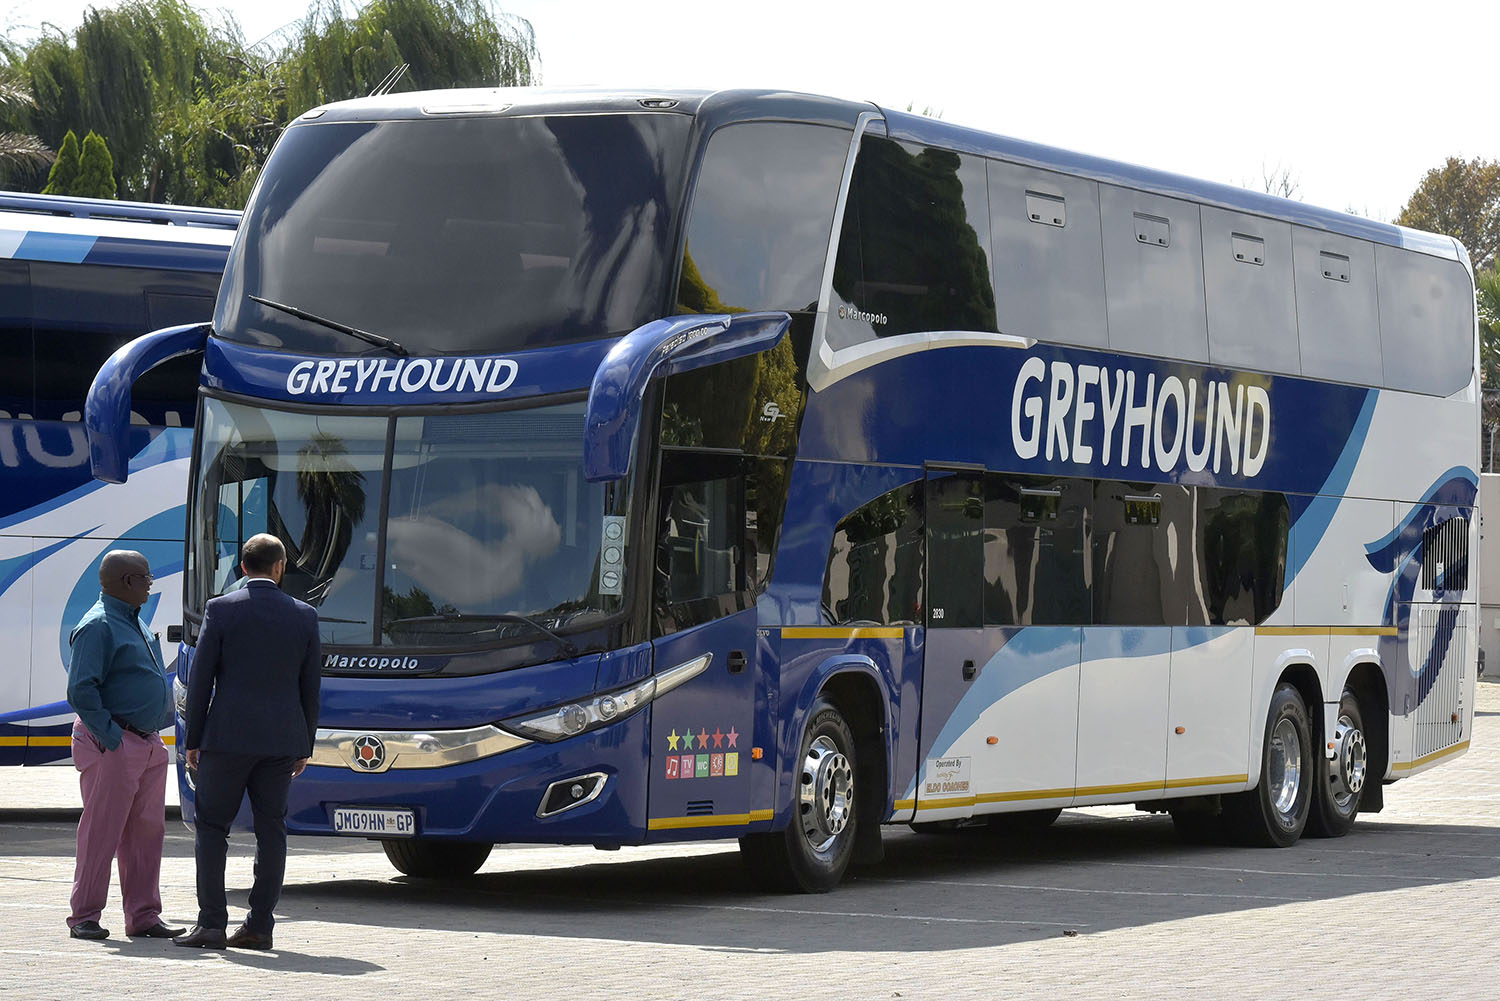 Greyhound buses back on the road after recovering from pandemic standstill